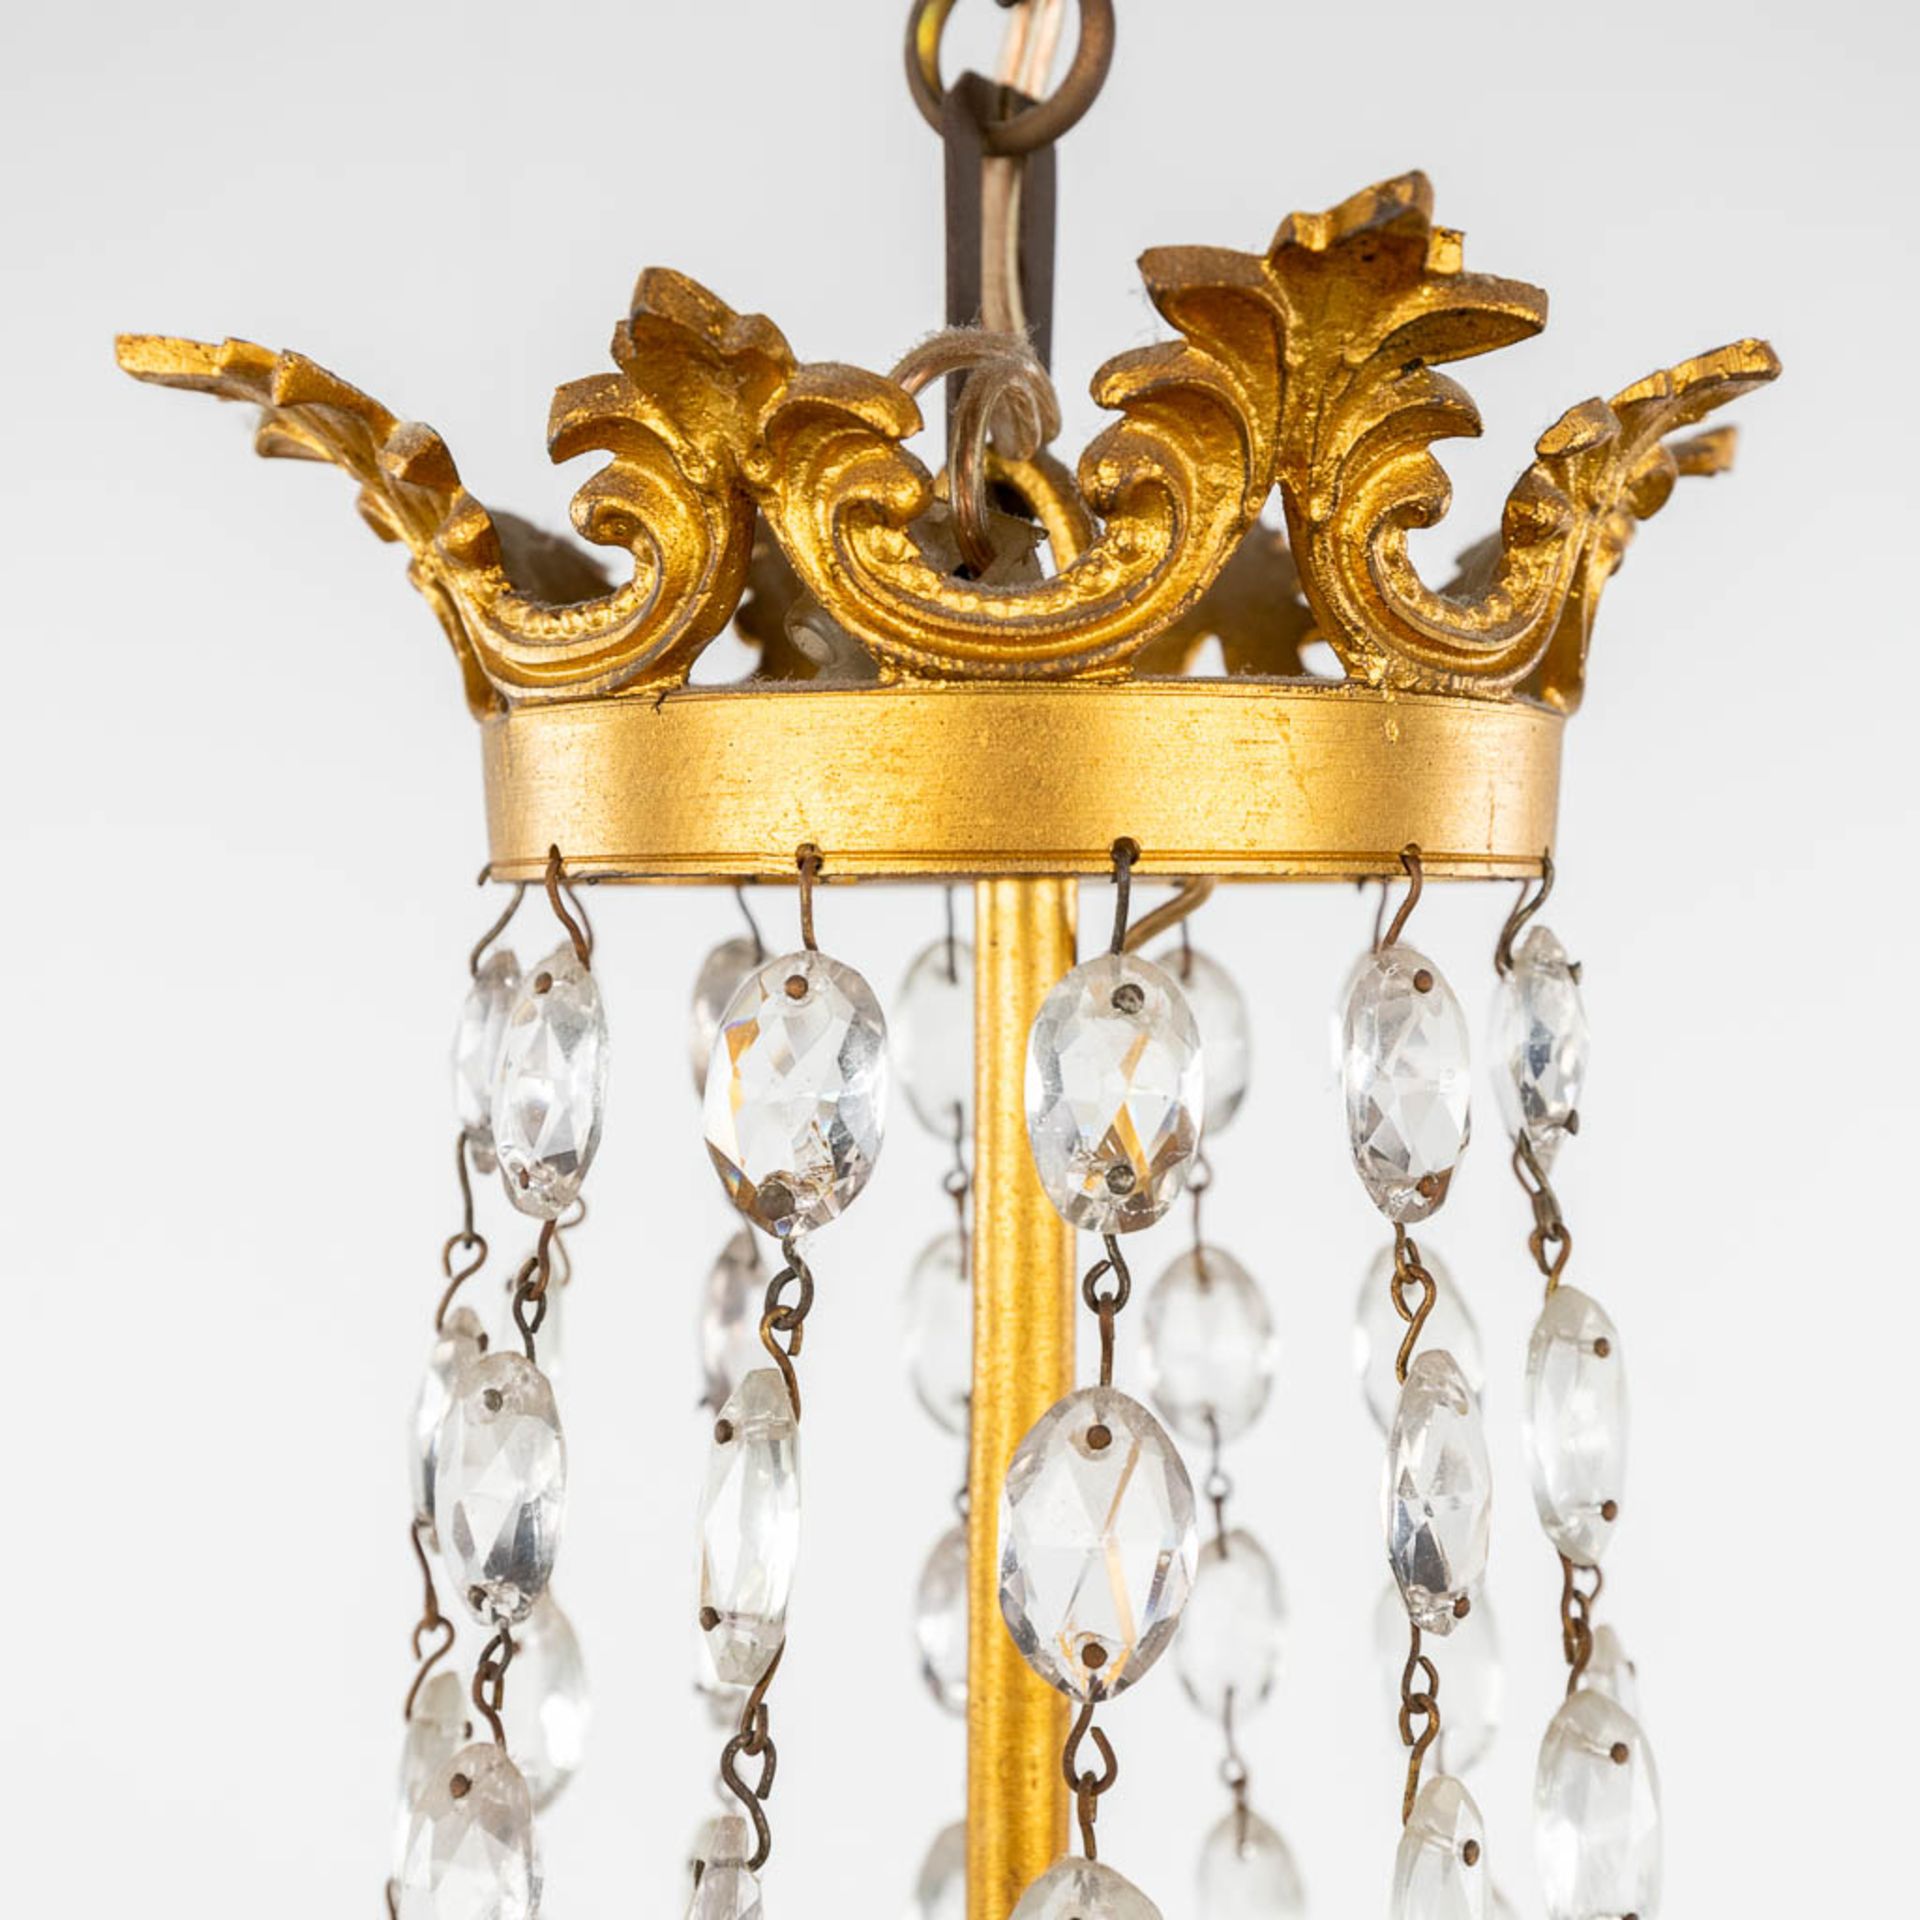 A chandelier 'Sac ˆ Perles', bronze and glass in empire style. 20th C. (H: 100 x D: 50 cm) - Image 9 of 11